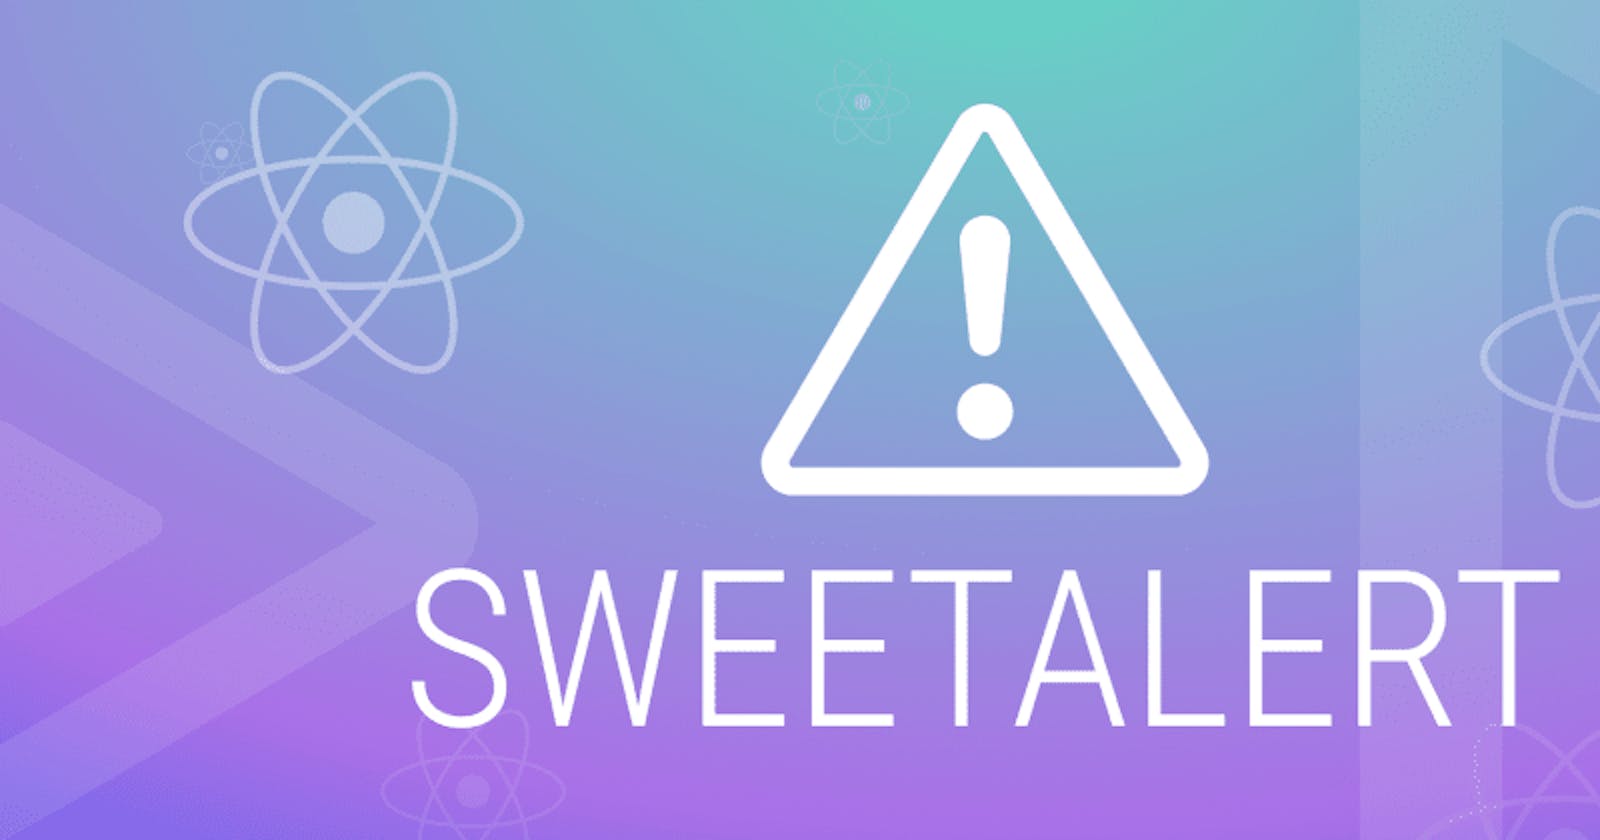 Better Alerts with Sweetalert2 for React apps